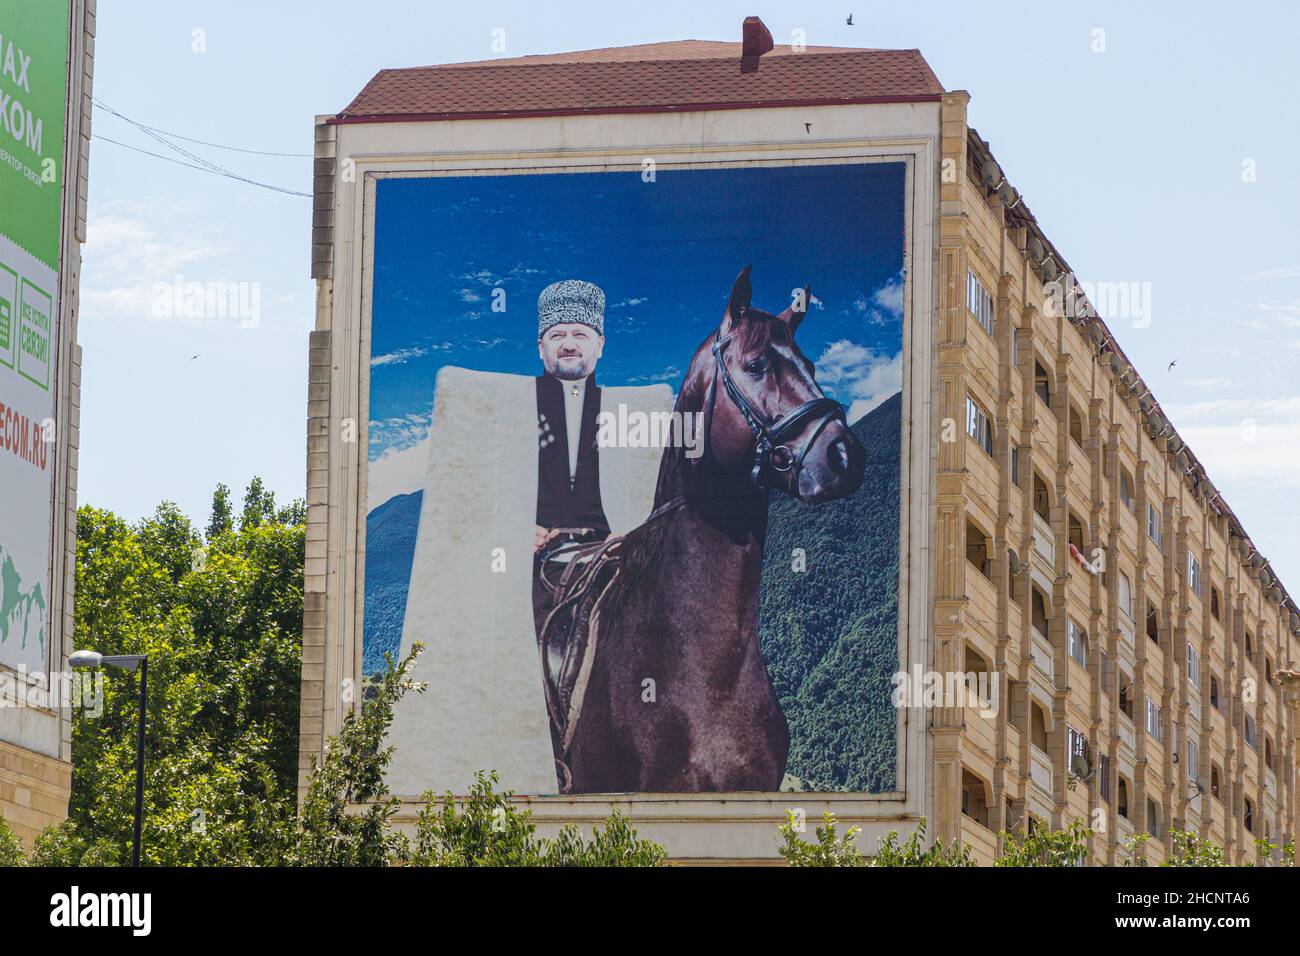 GROZNY, RUSSIA - JUNE 26, 2018: Poster of Ramzan Kadyrov on a house in Grozny, Russia. Stock Photo